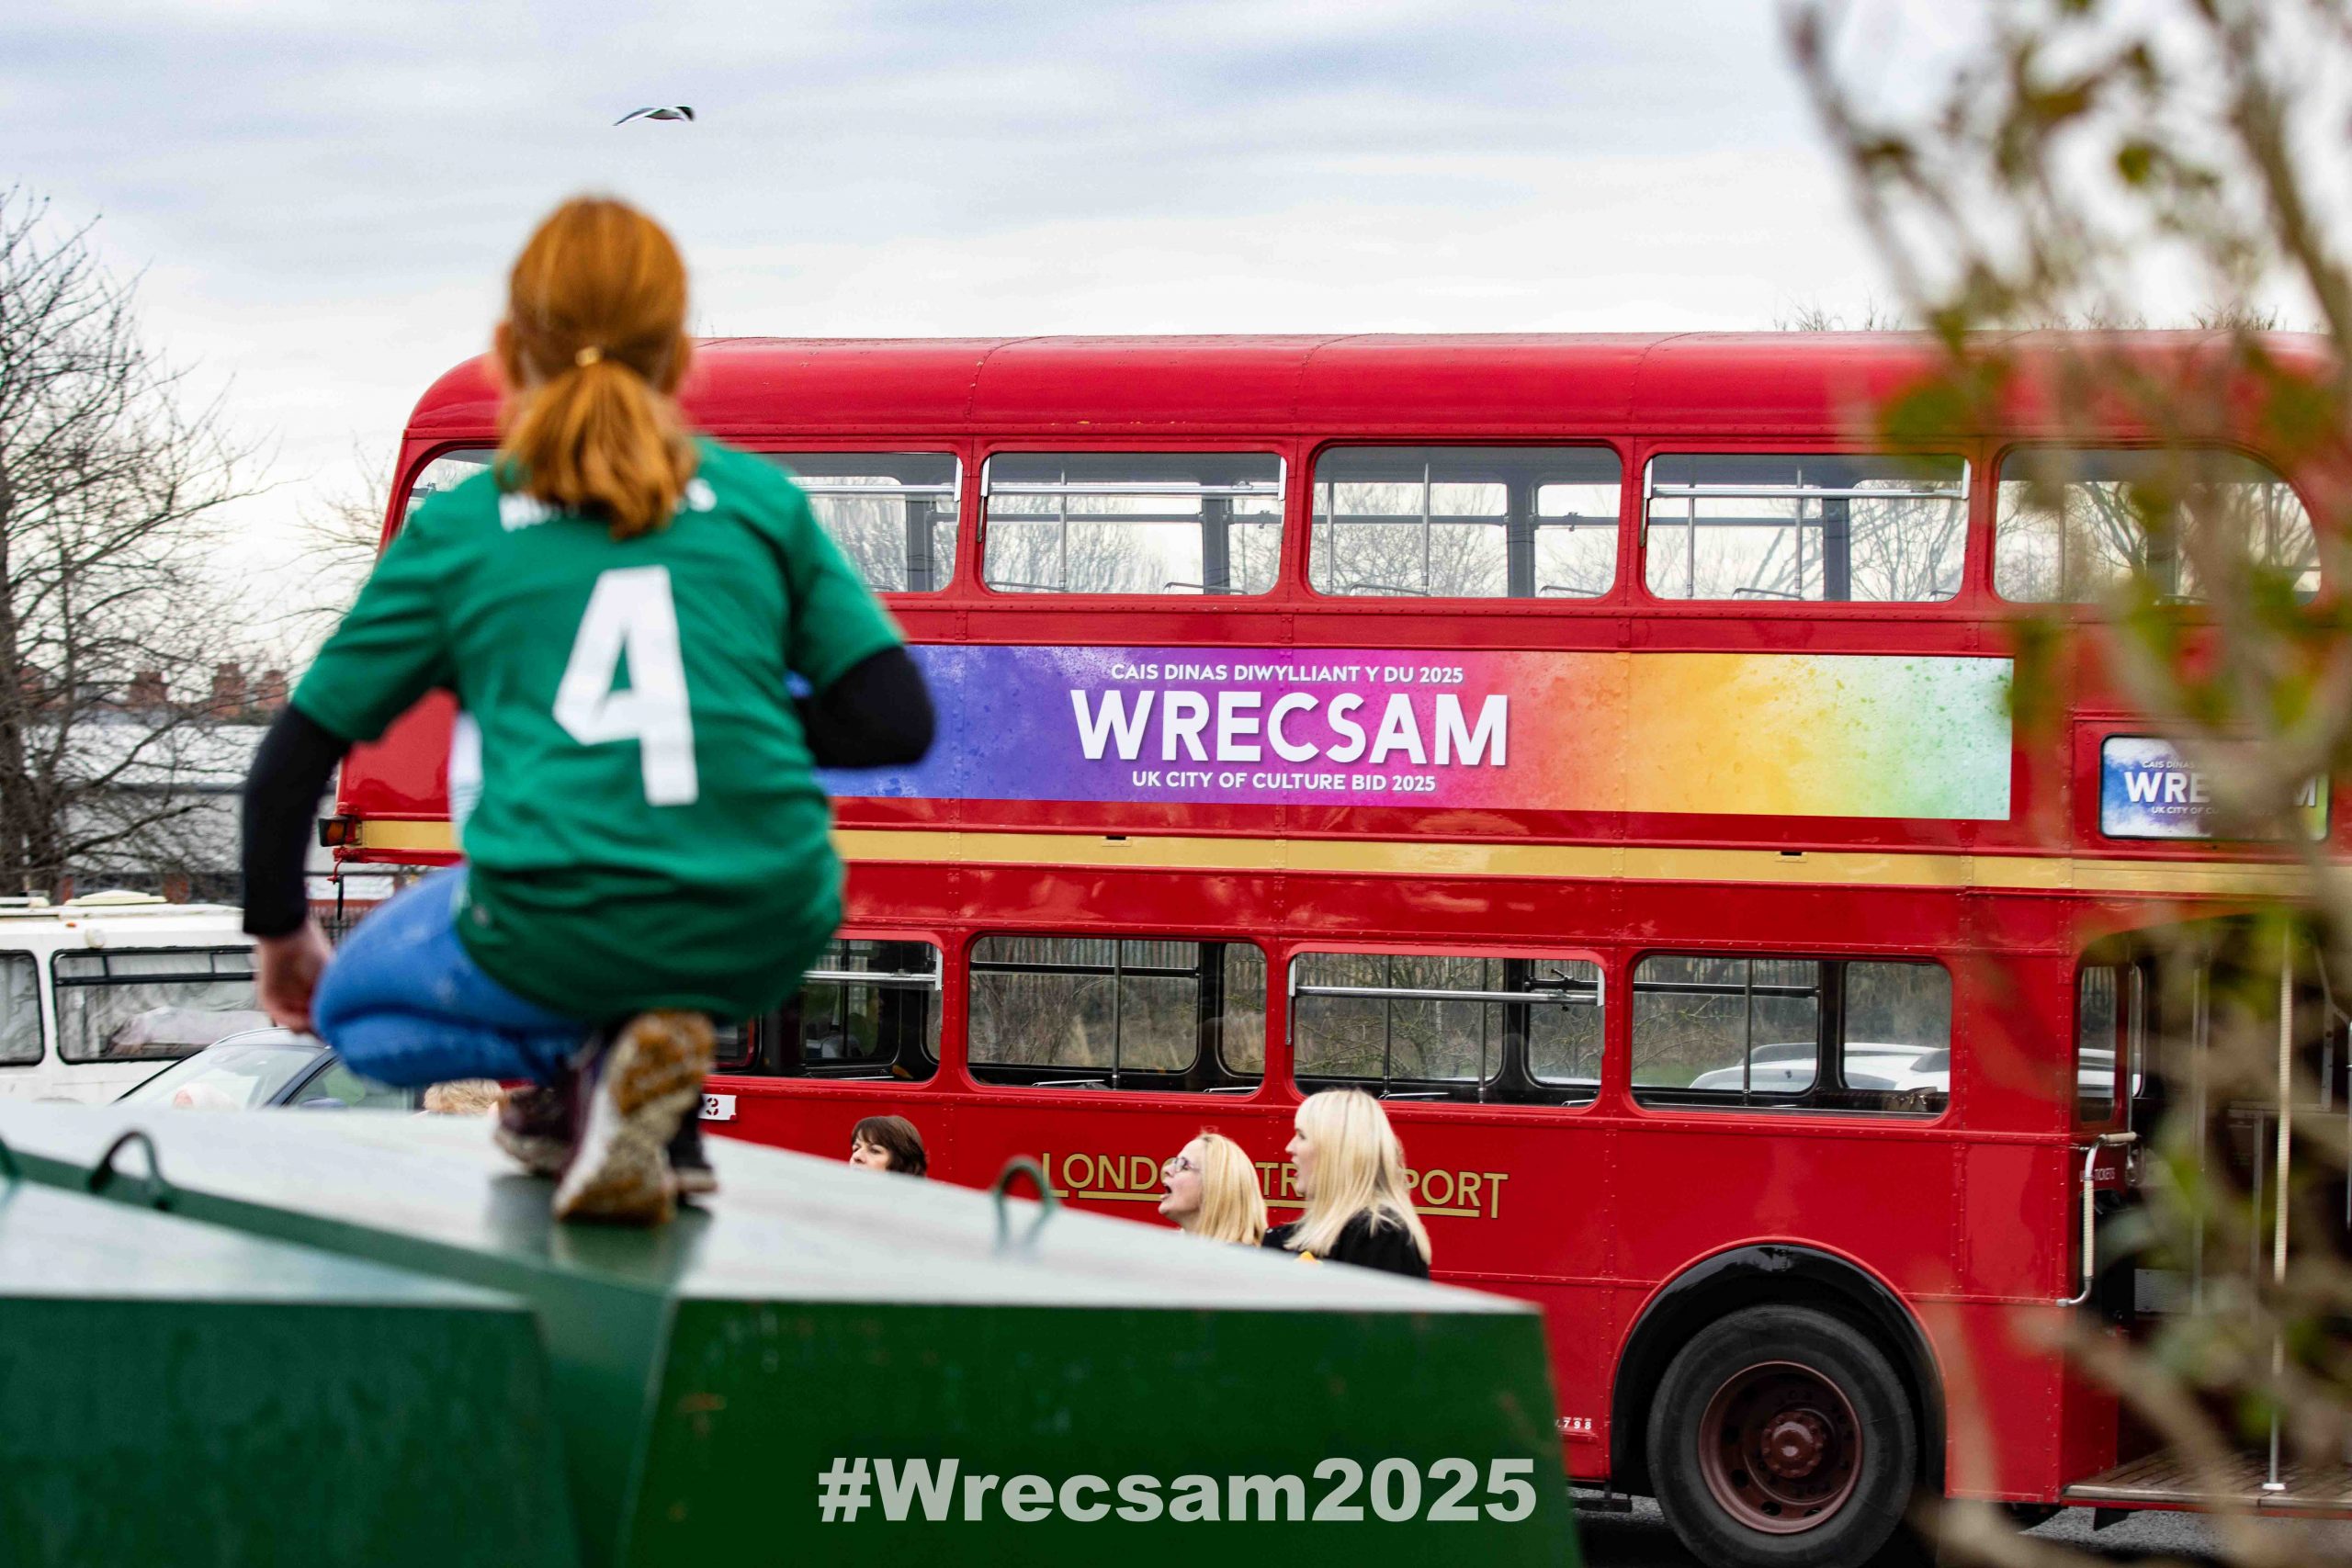 What will our story be... #Wrecsam2025